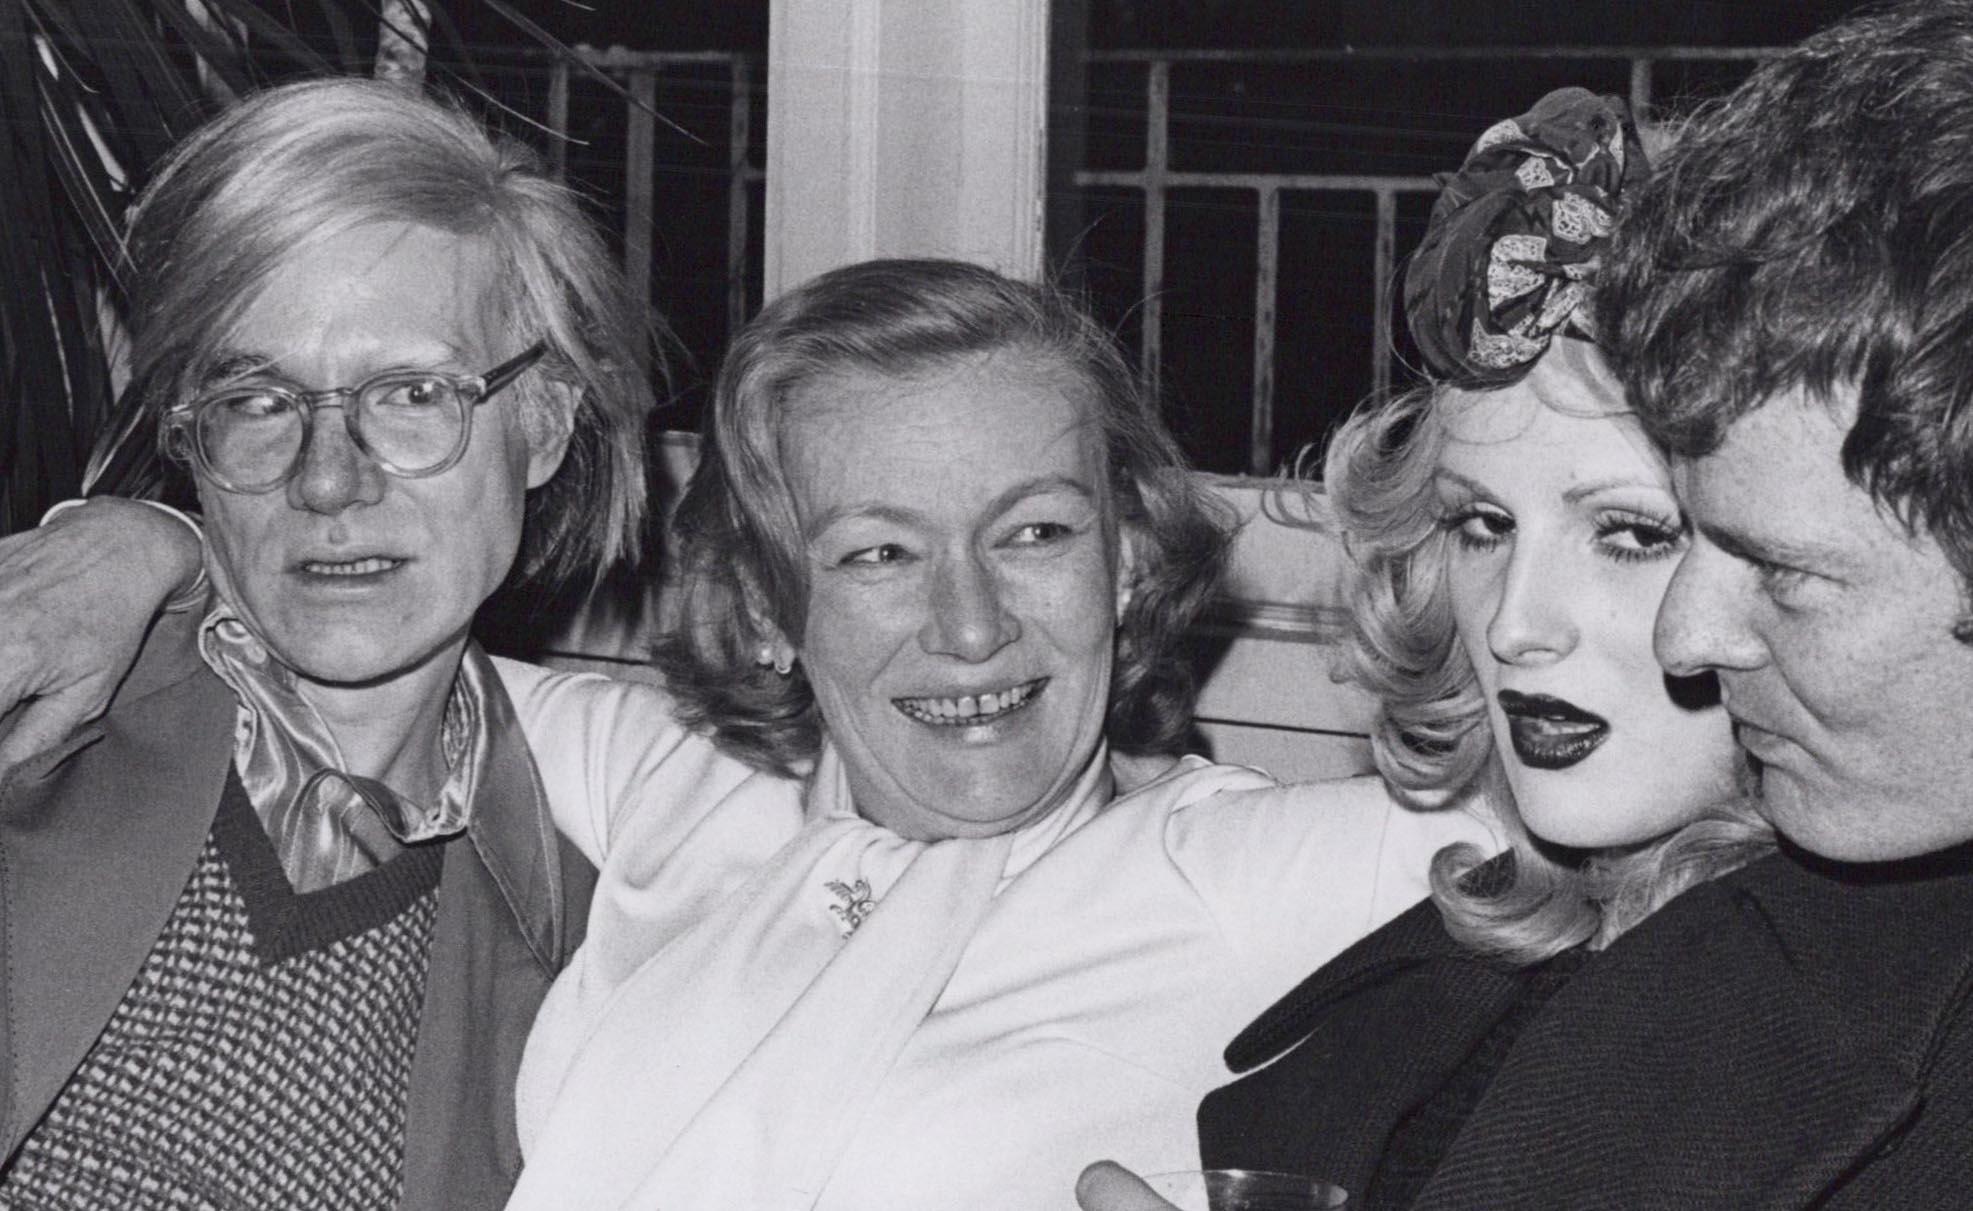 Veronica Lake at a party w/ Andy Warhol, Candy Darling and Paul Morrissey - Photograph by Jack Mitchell